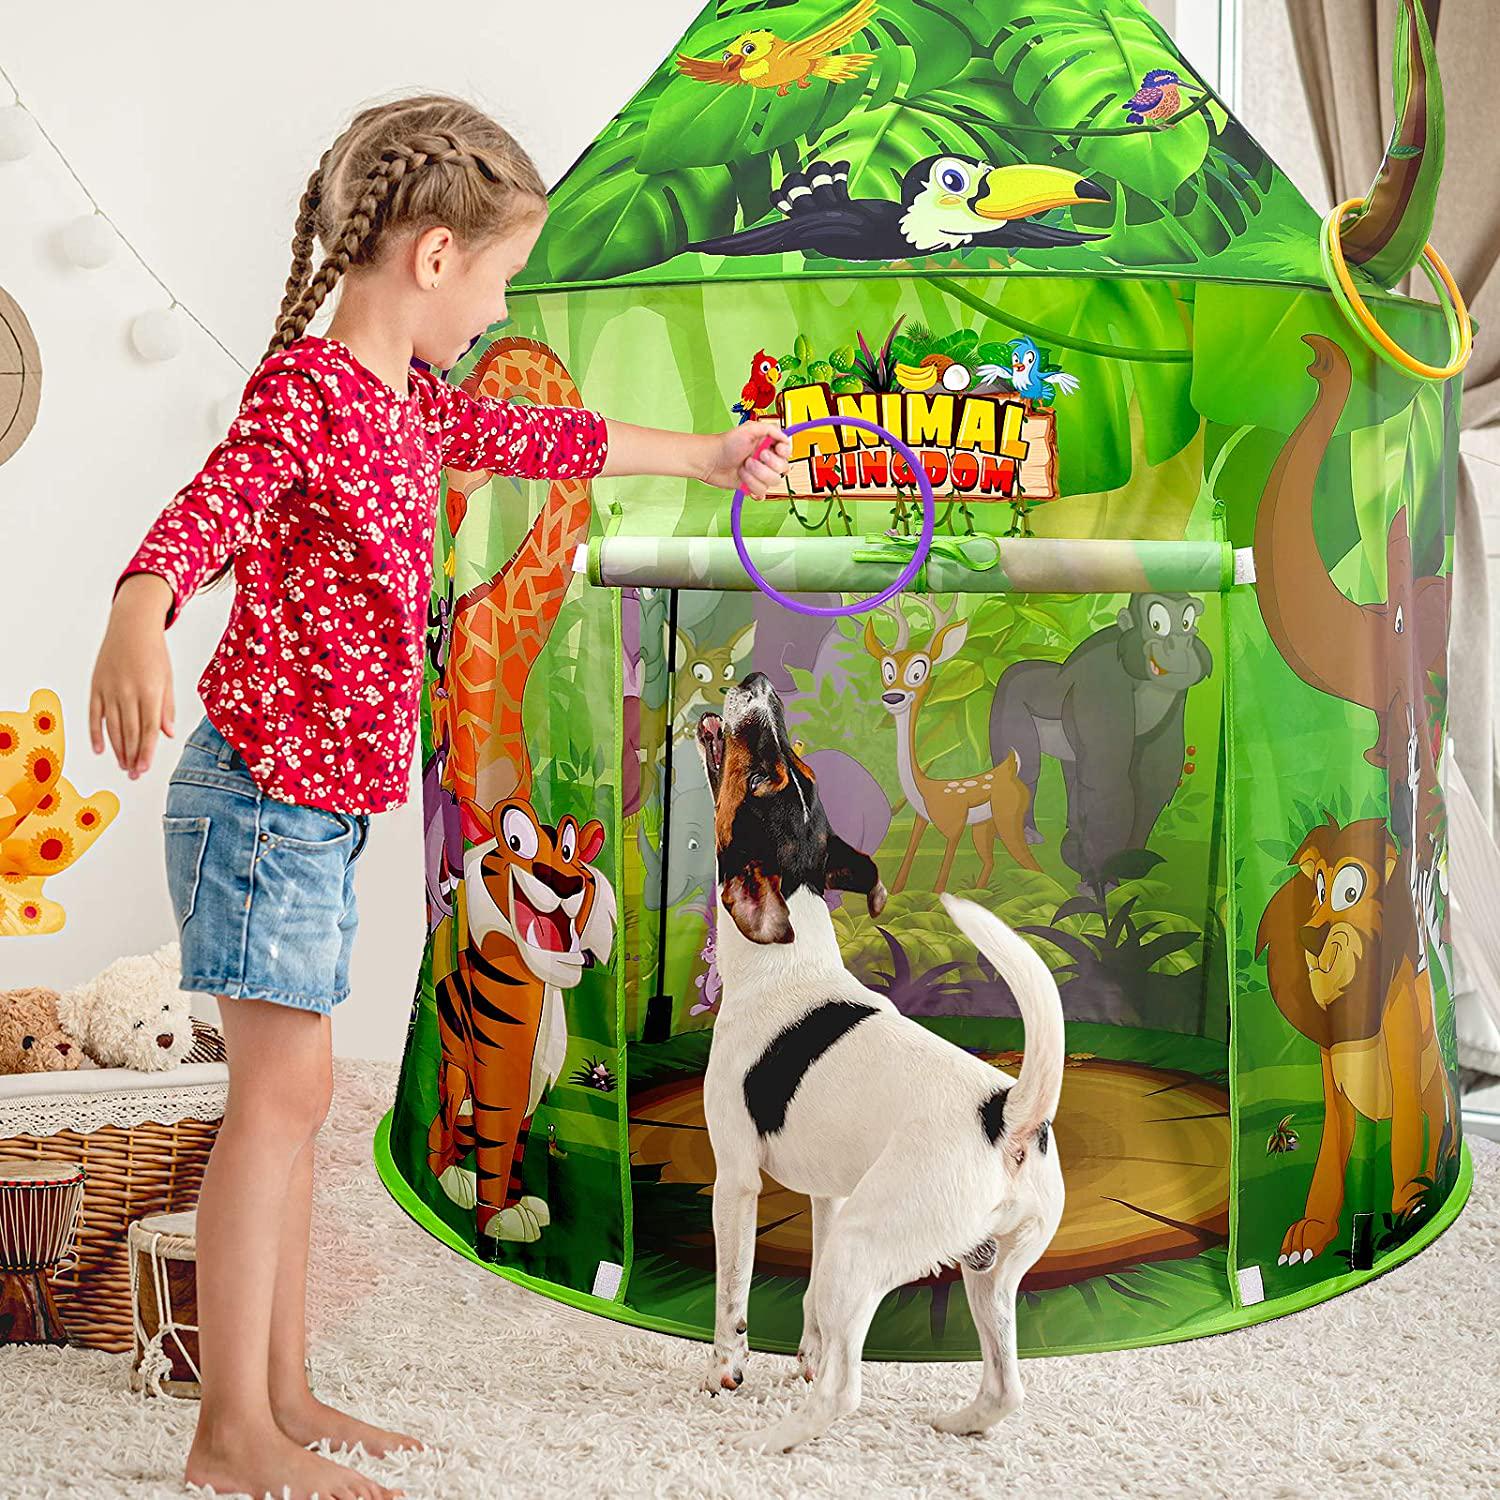 MayMoi, MayMoi Animal World Kids Play Tent with Ring Toss - Pop Up Tent for Kids Girls and Boys, Indoor Play Kids Tent and Foldable Playhouse Toy